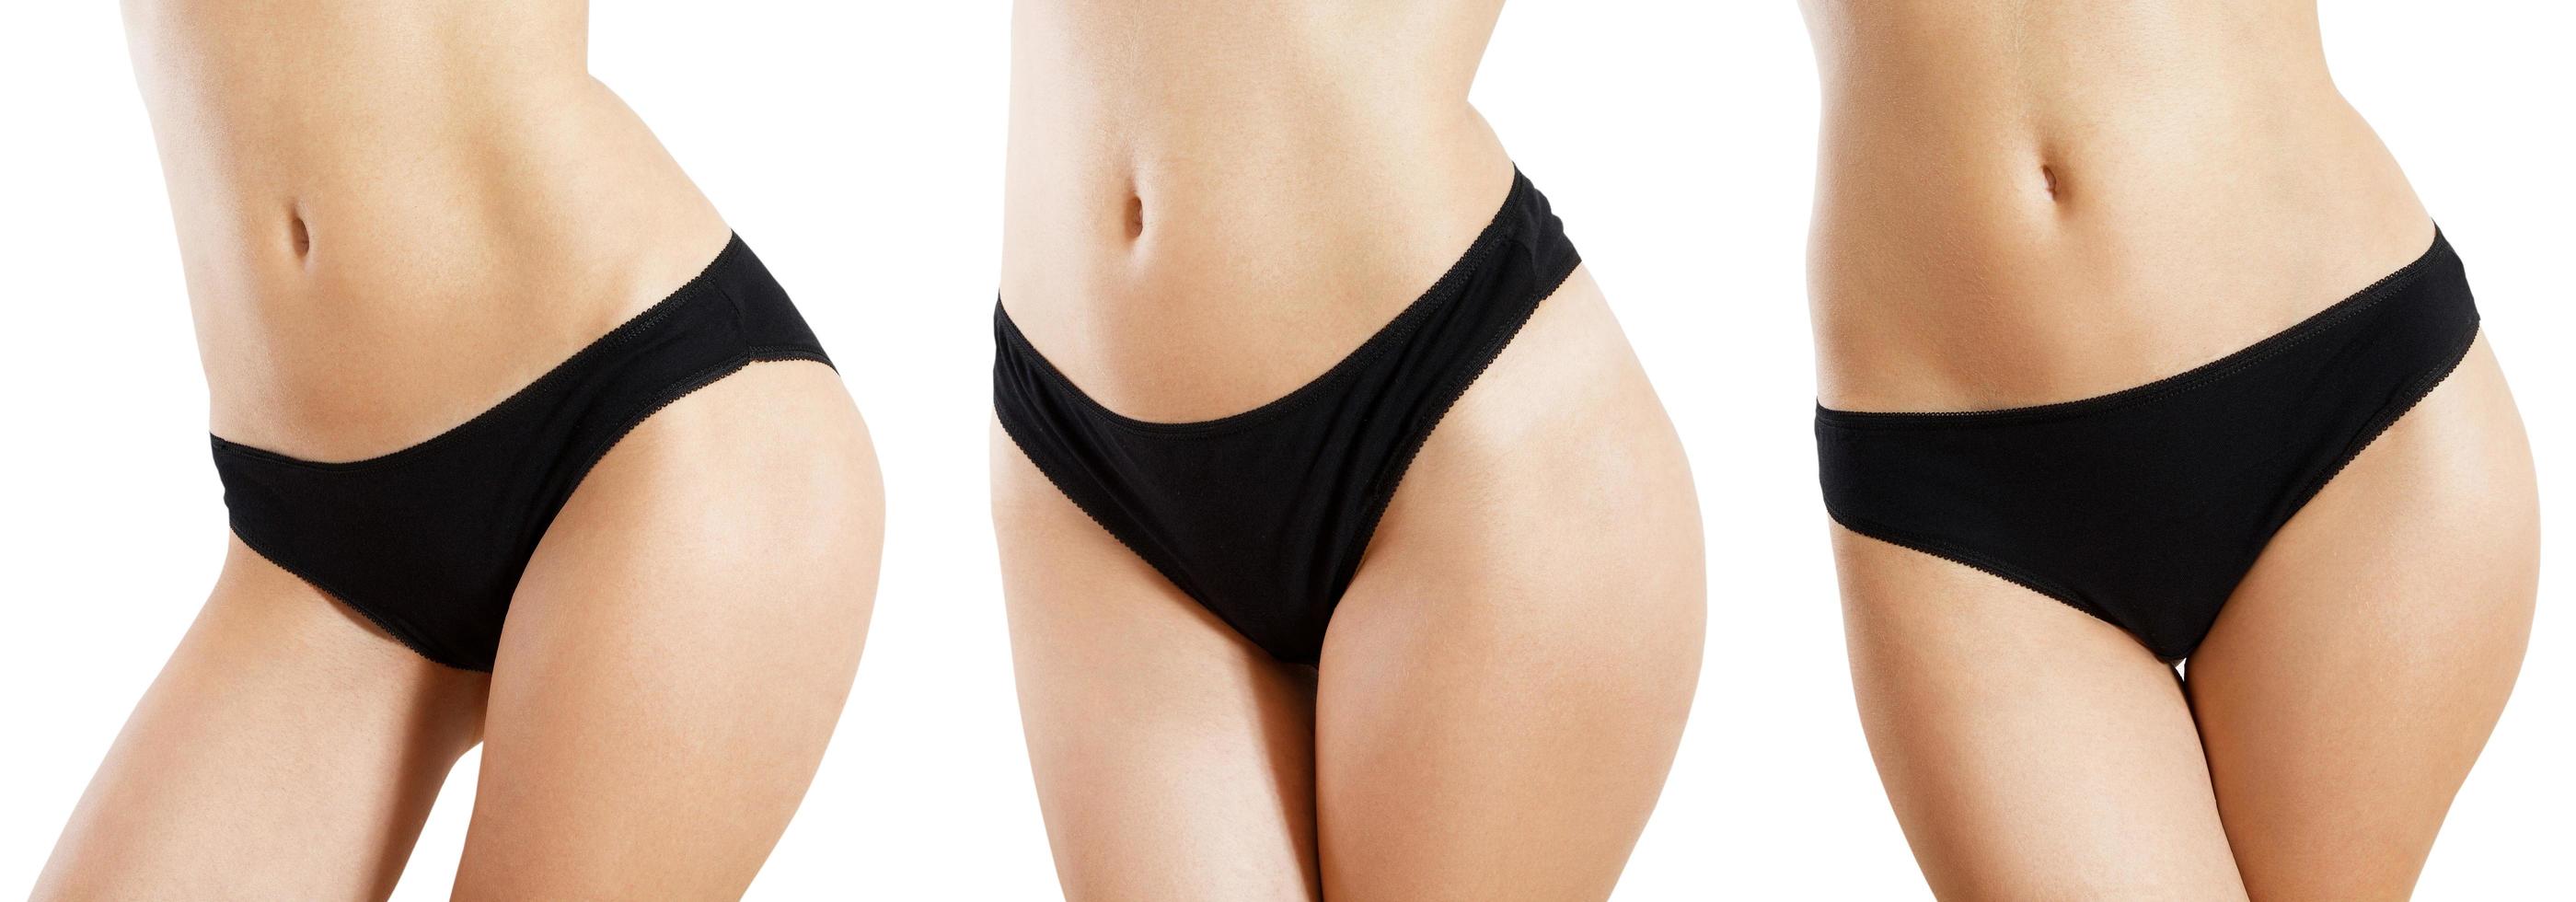 Woman Black Panties PSD, 500+ High Quality Free PSD Templates for Download